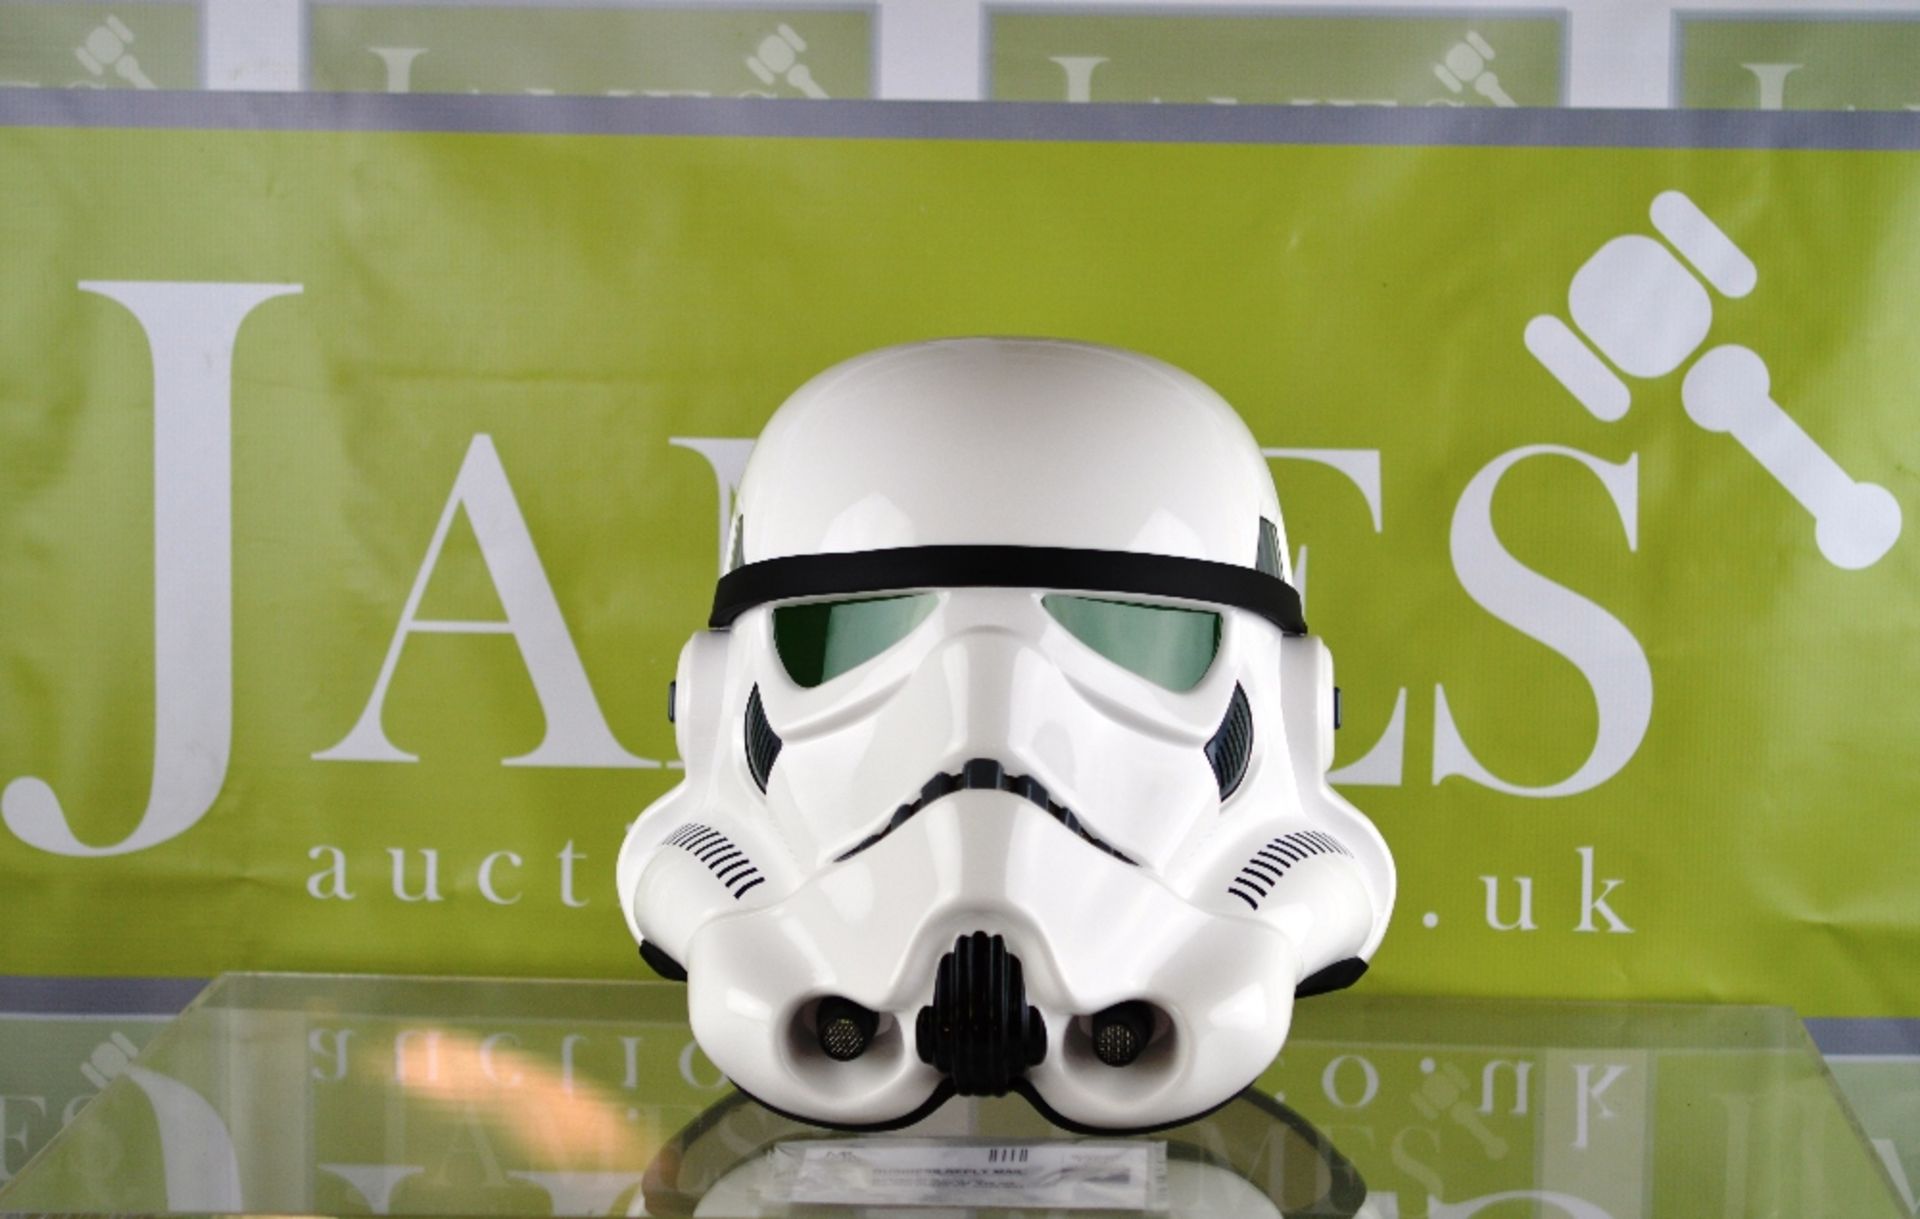 Master replica lifesize 1:1 stormtrooper mask comes with all original packaging, mint example - Image 4 of 4